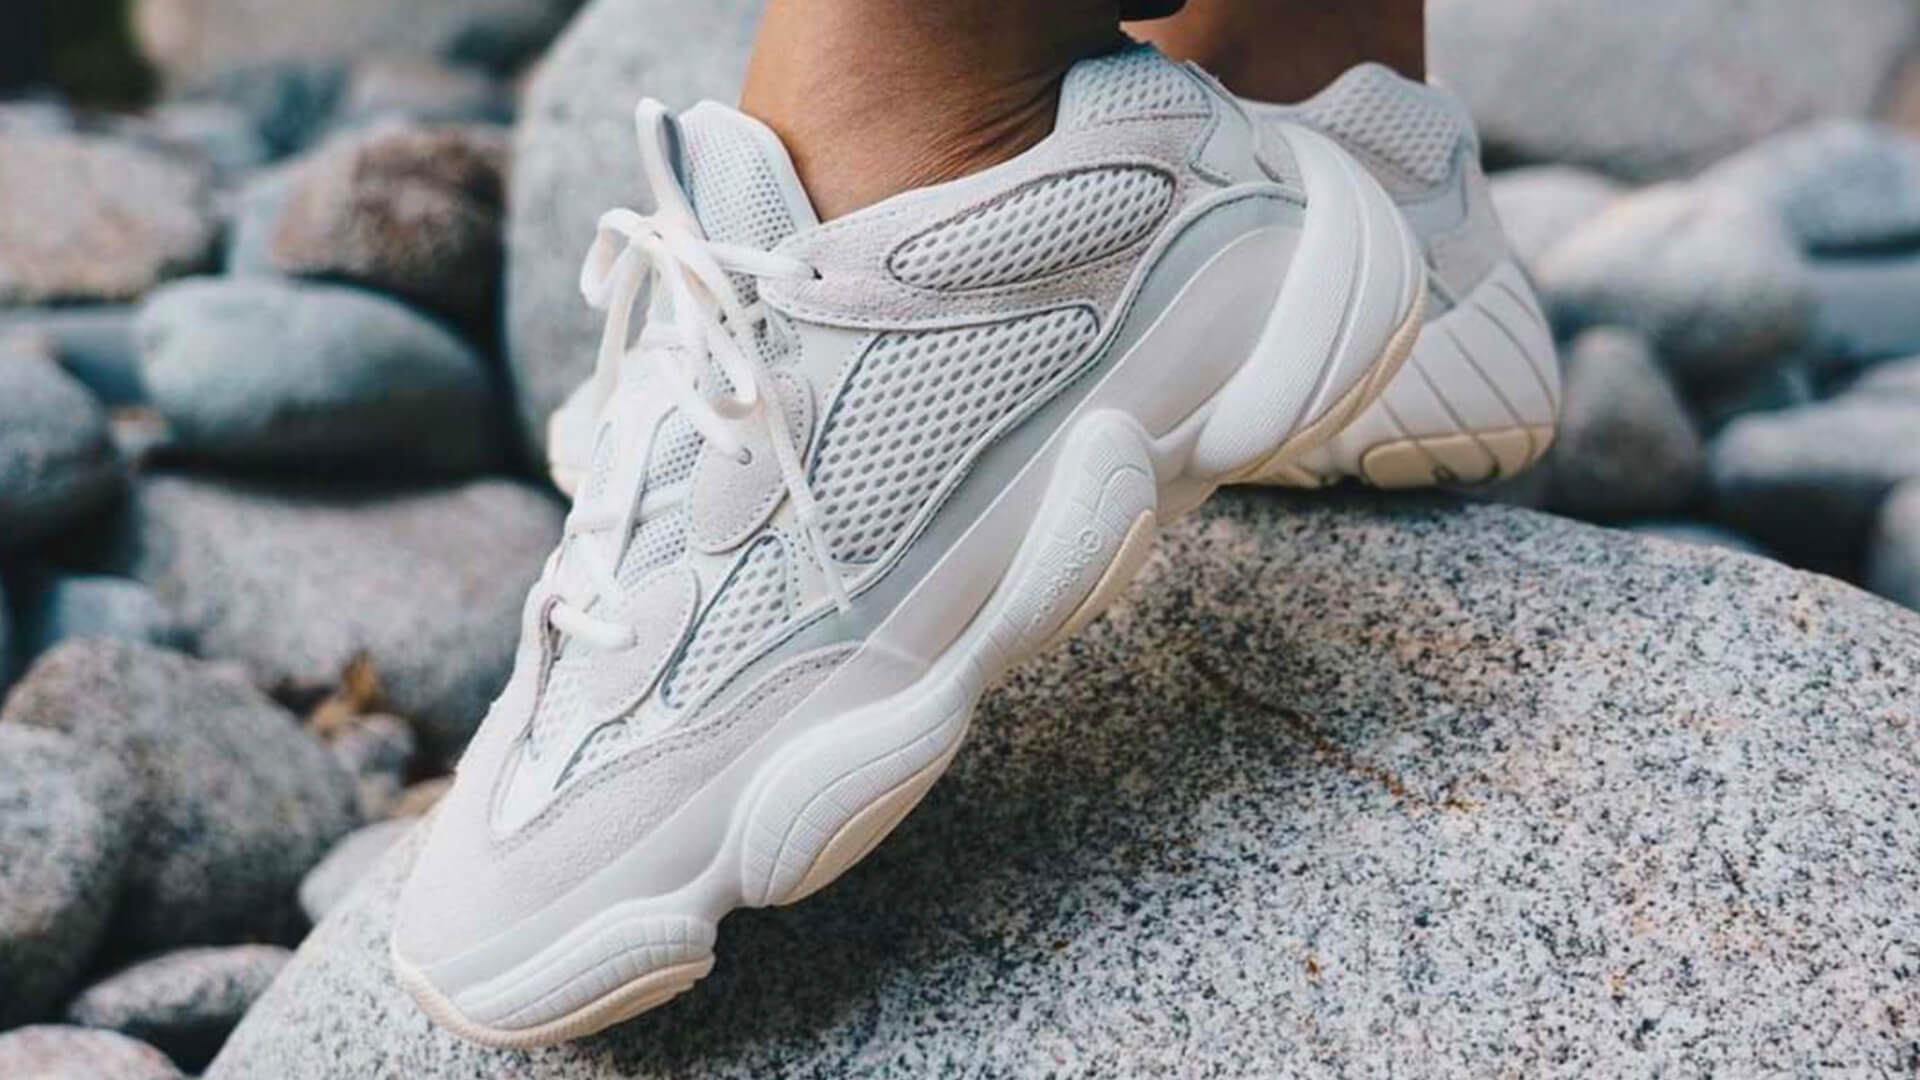 Latest Yeezy 500 Trainer Releases & Next Drops. The Sole Supplier